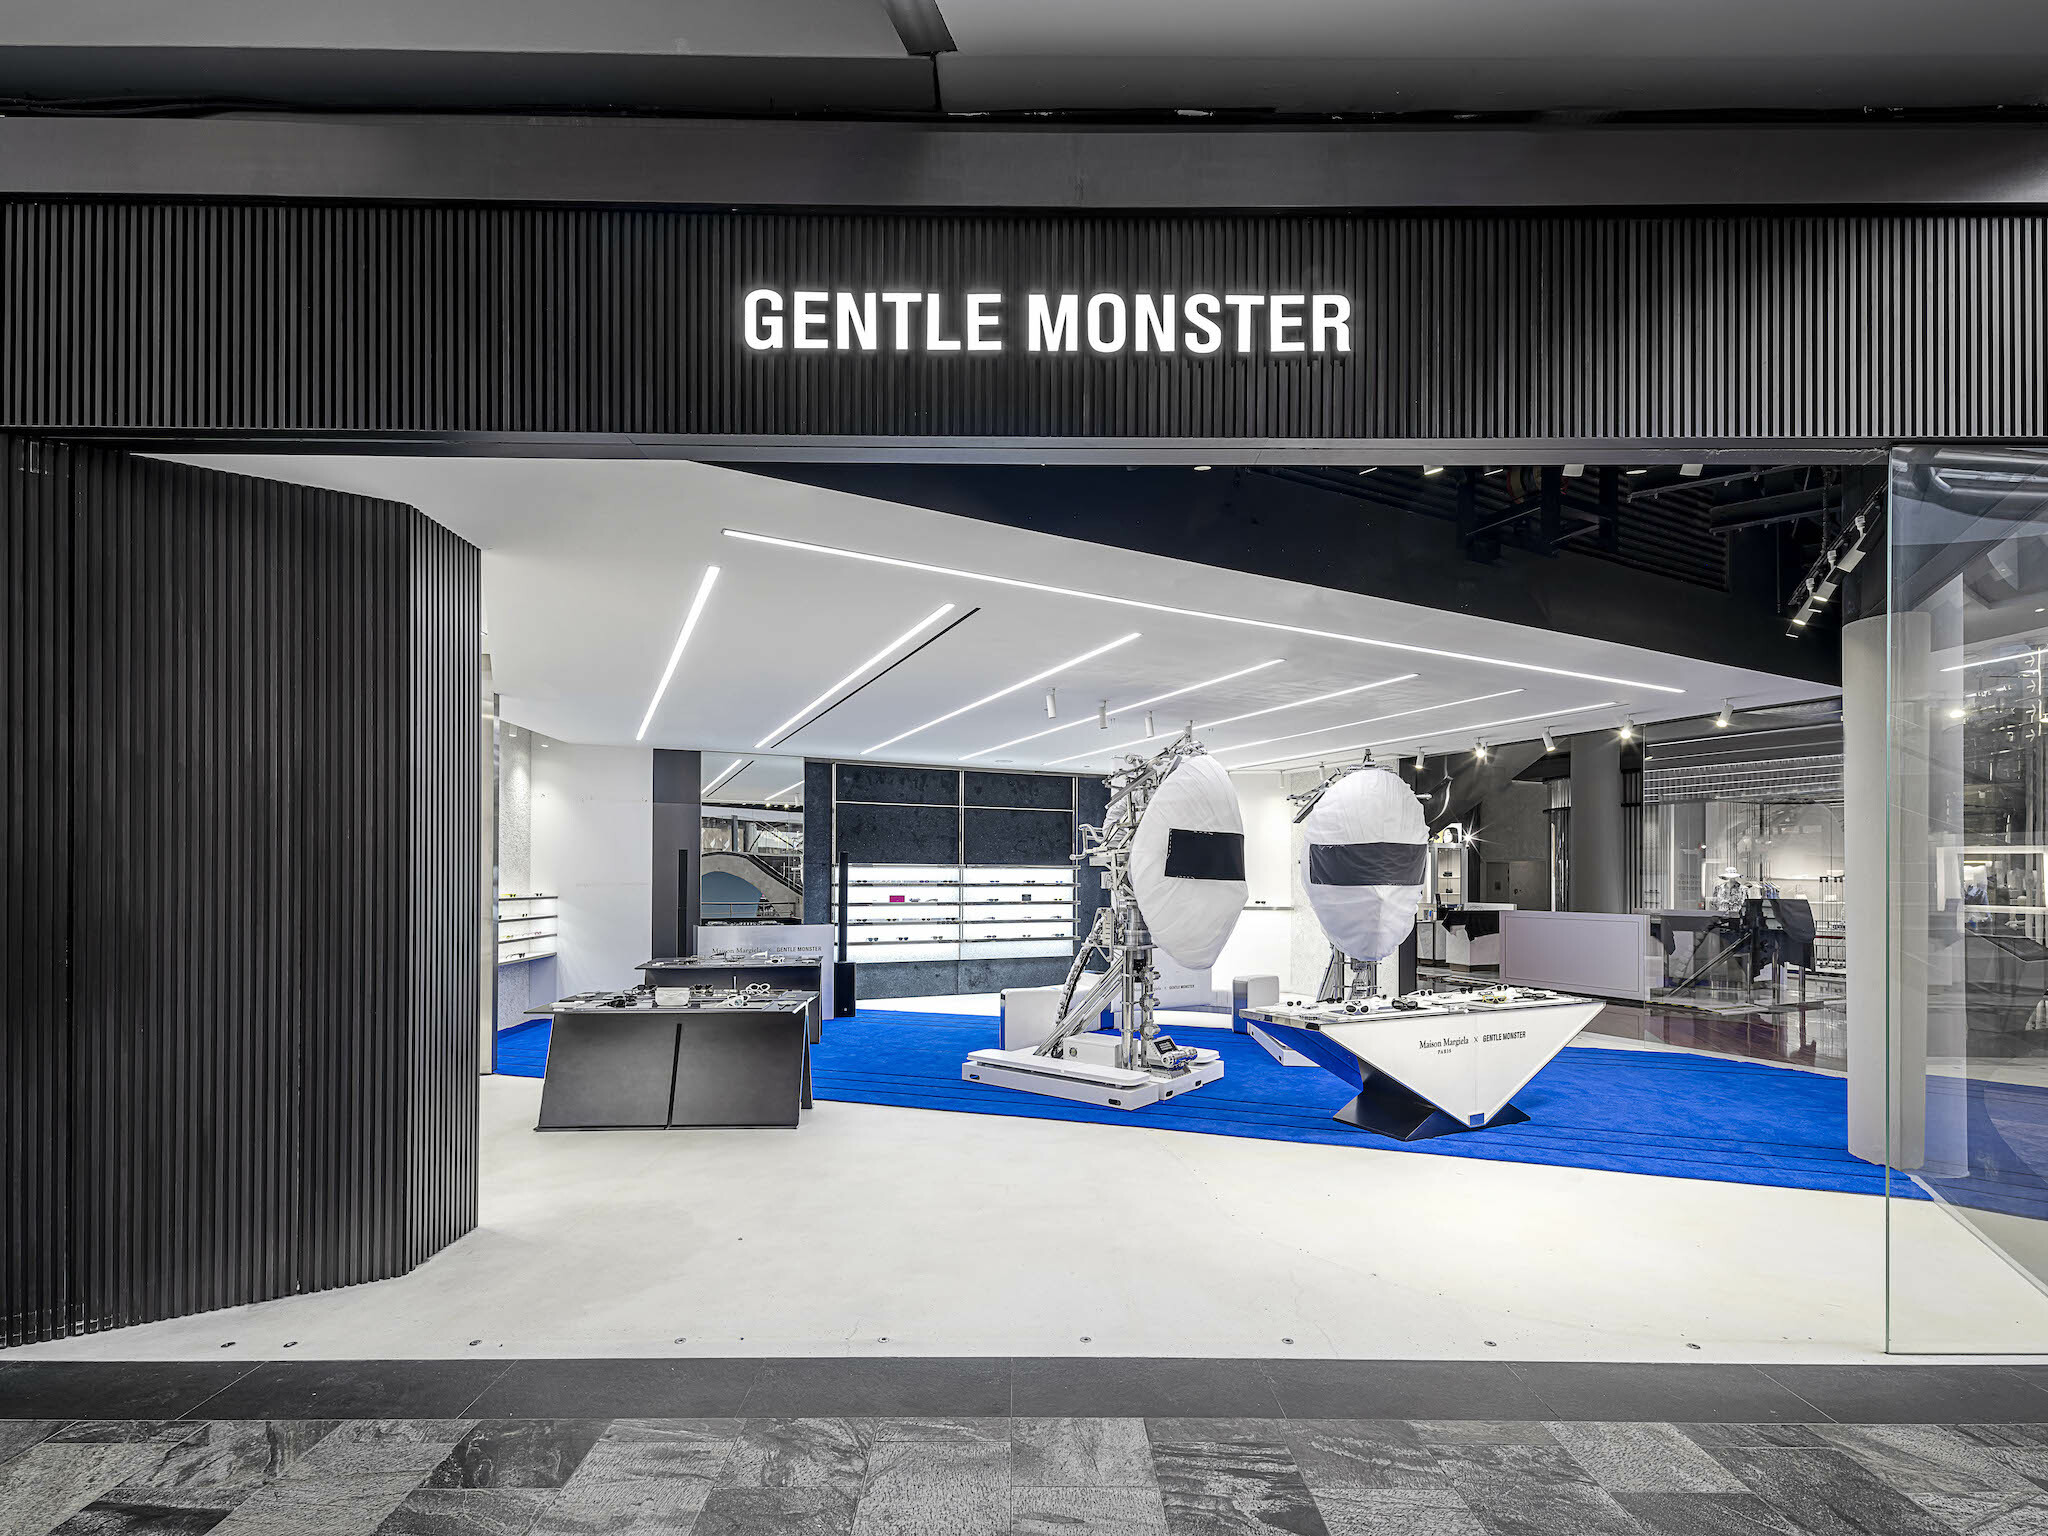 Maison Margiela x Gentle Monster popup | Things to do in Singapore